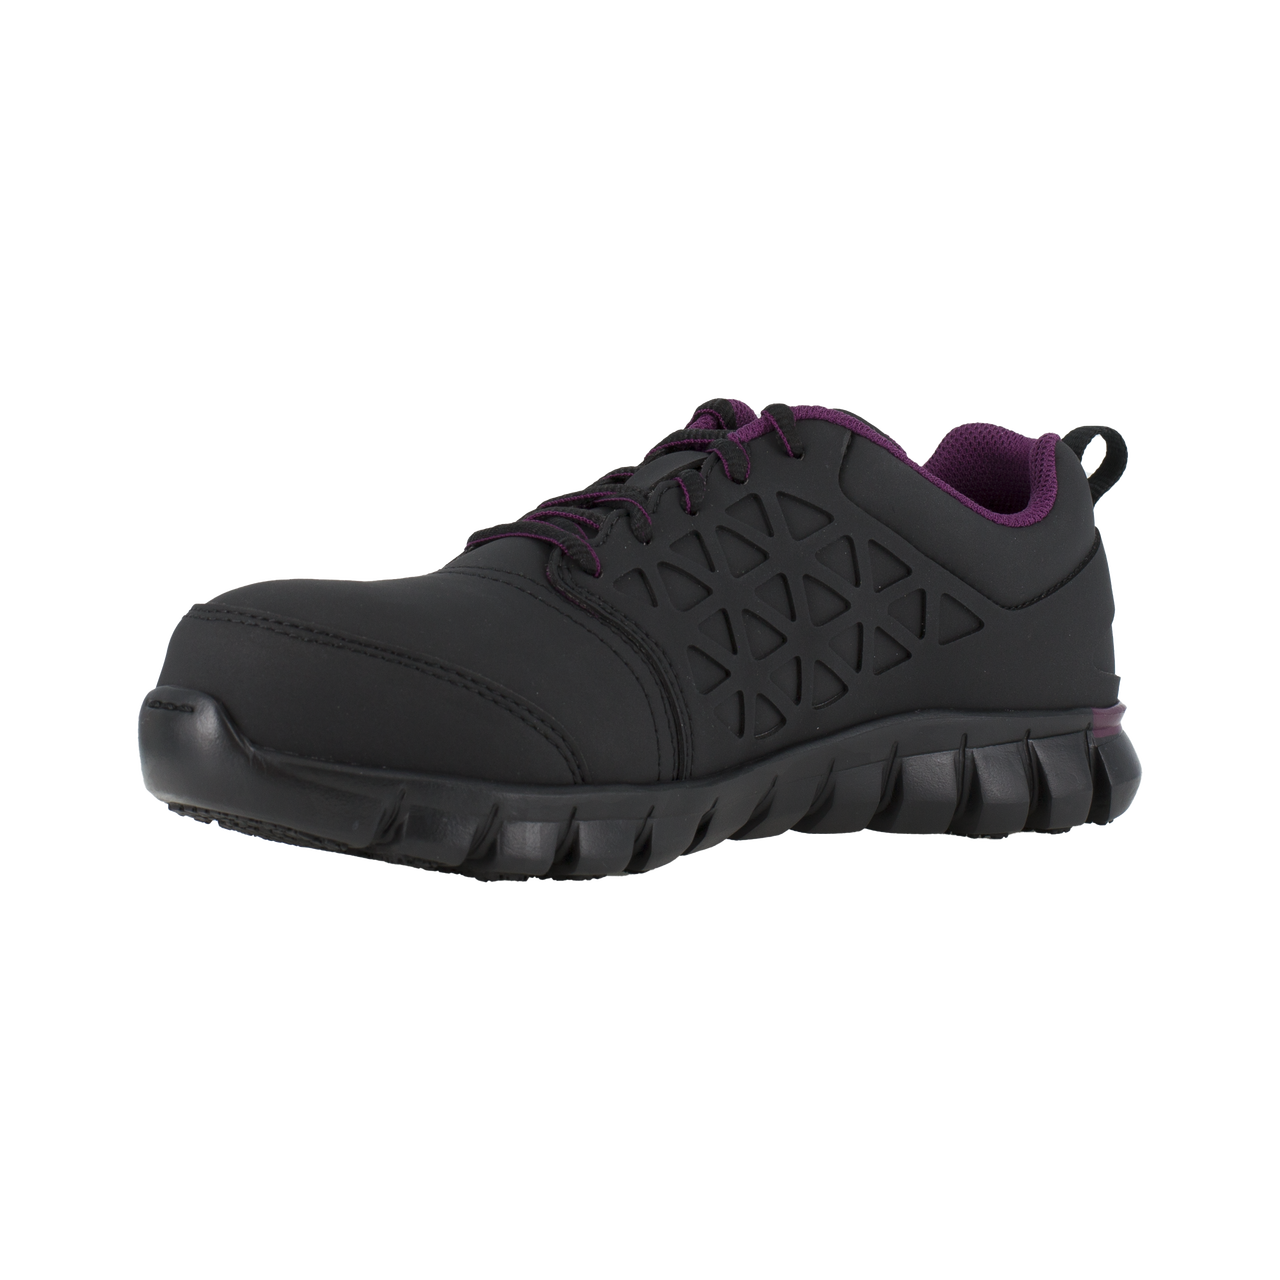 RB492 Women's Athletic Composite Toe Work Shoe - Black and Plum